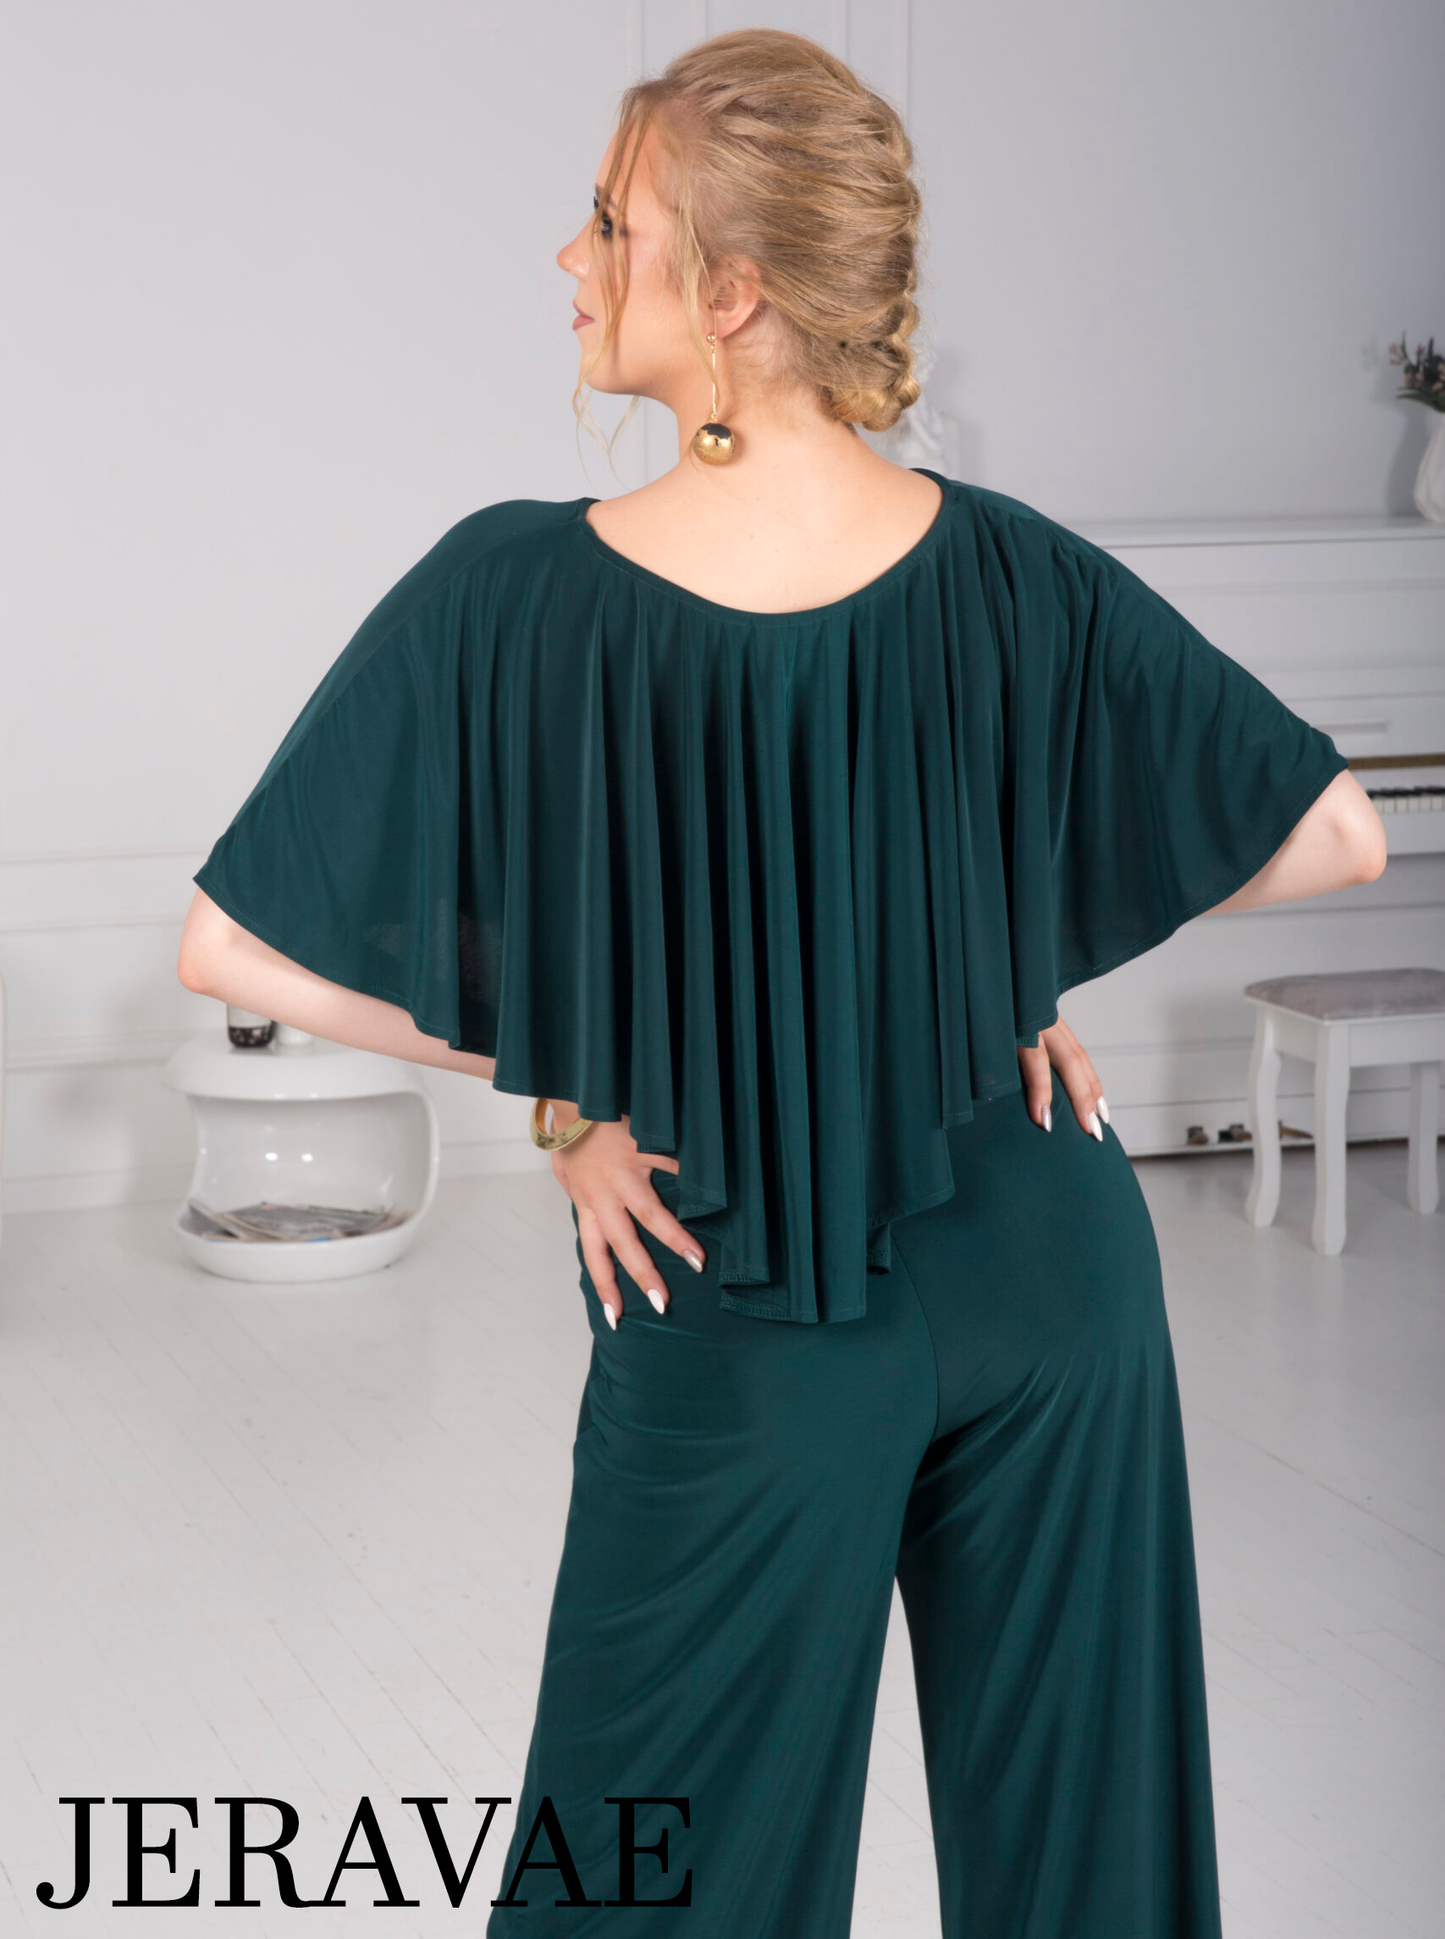 Senga Dancewear BOLERO Bottle Green Jumpsuit with Ruffle Cape, Wide Leg Pants, and Tie Detail with Gold Buckle PRA 984 in Stock